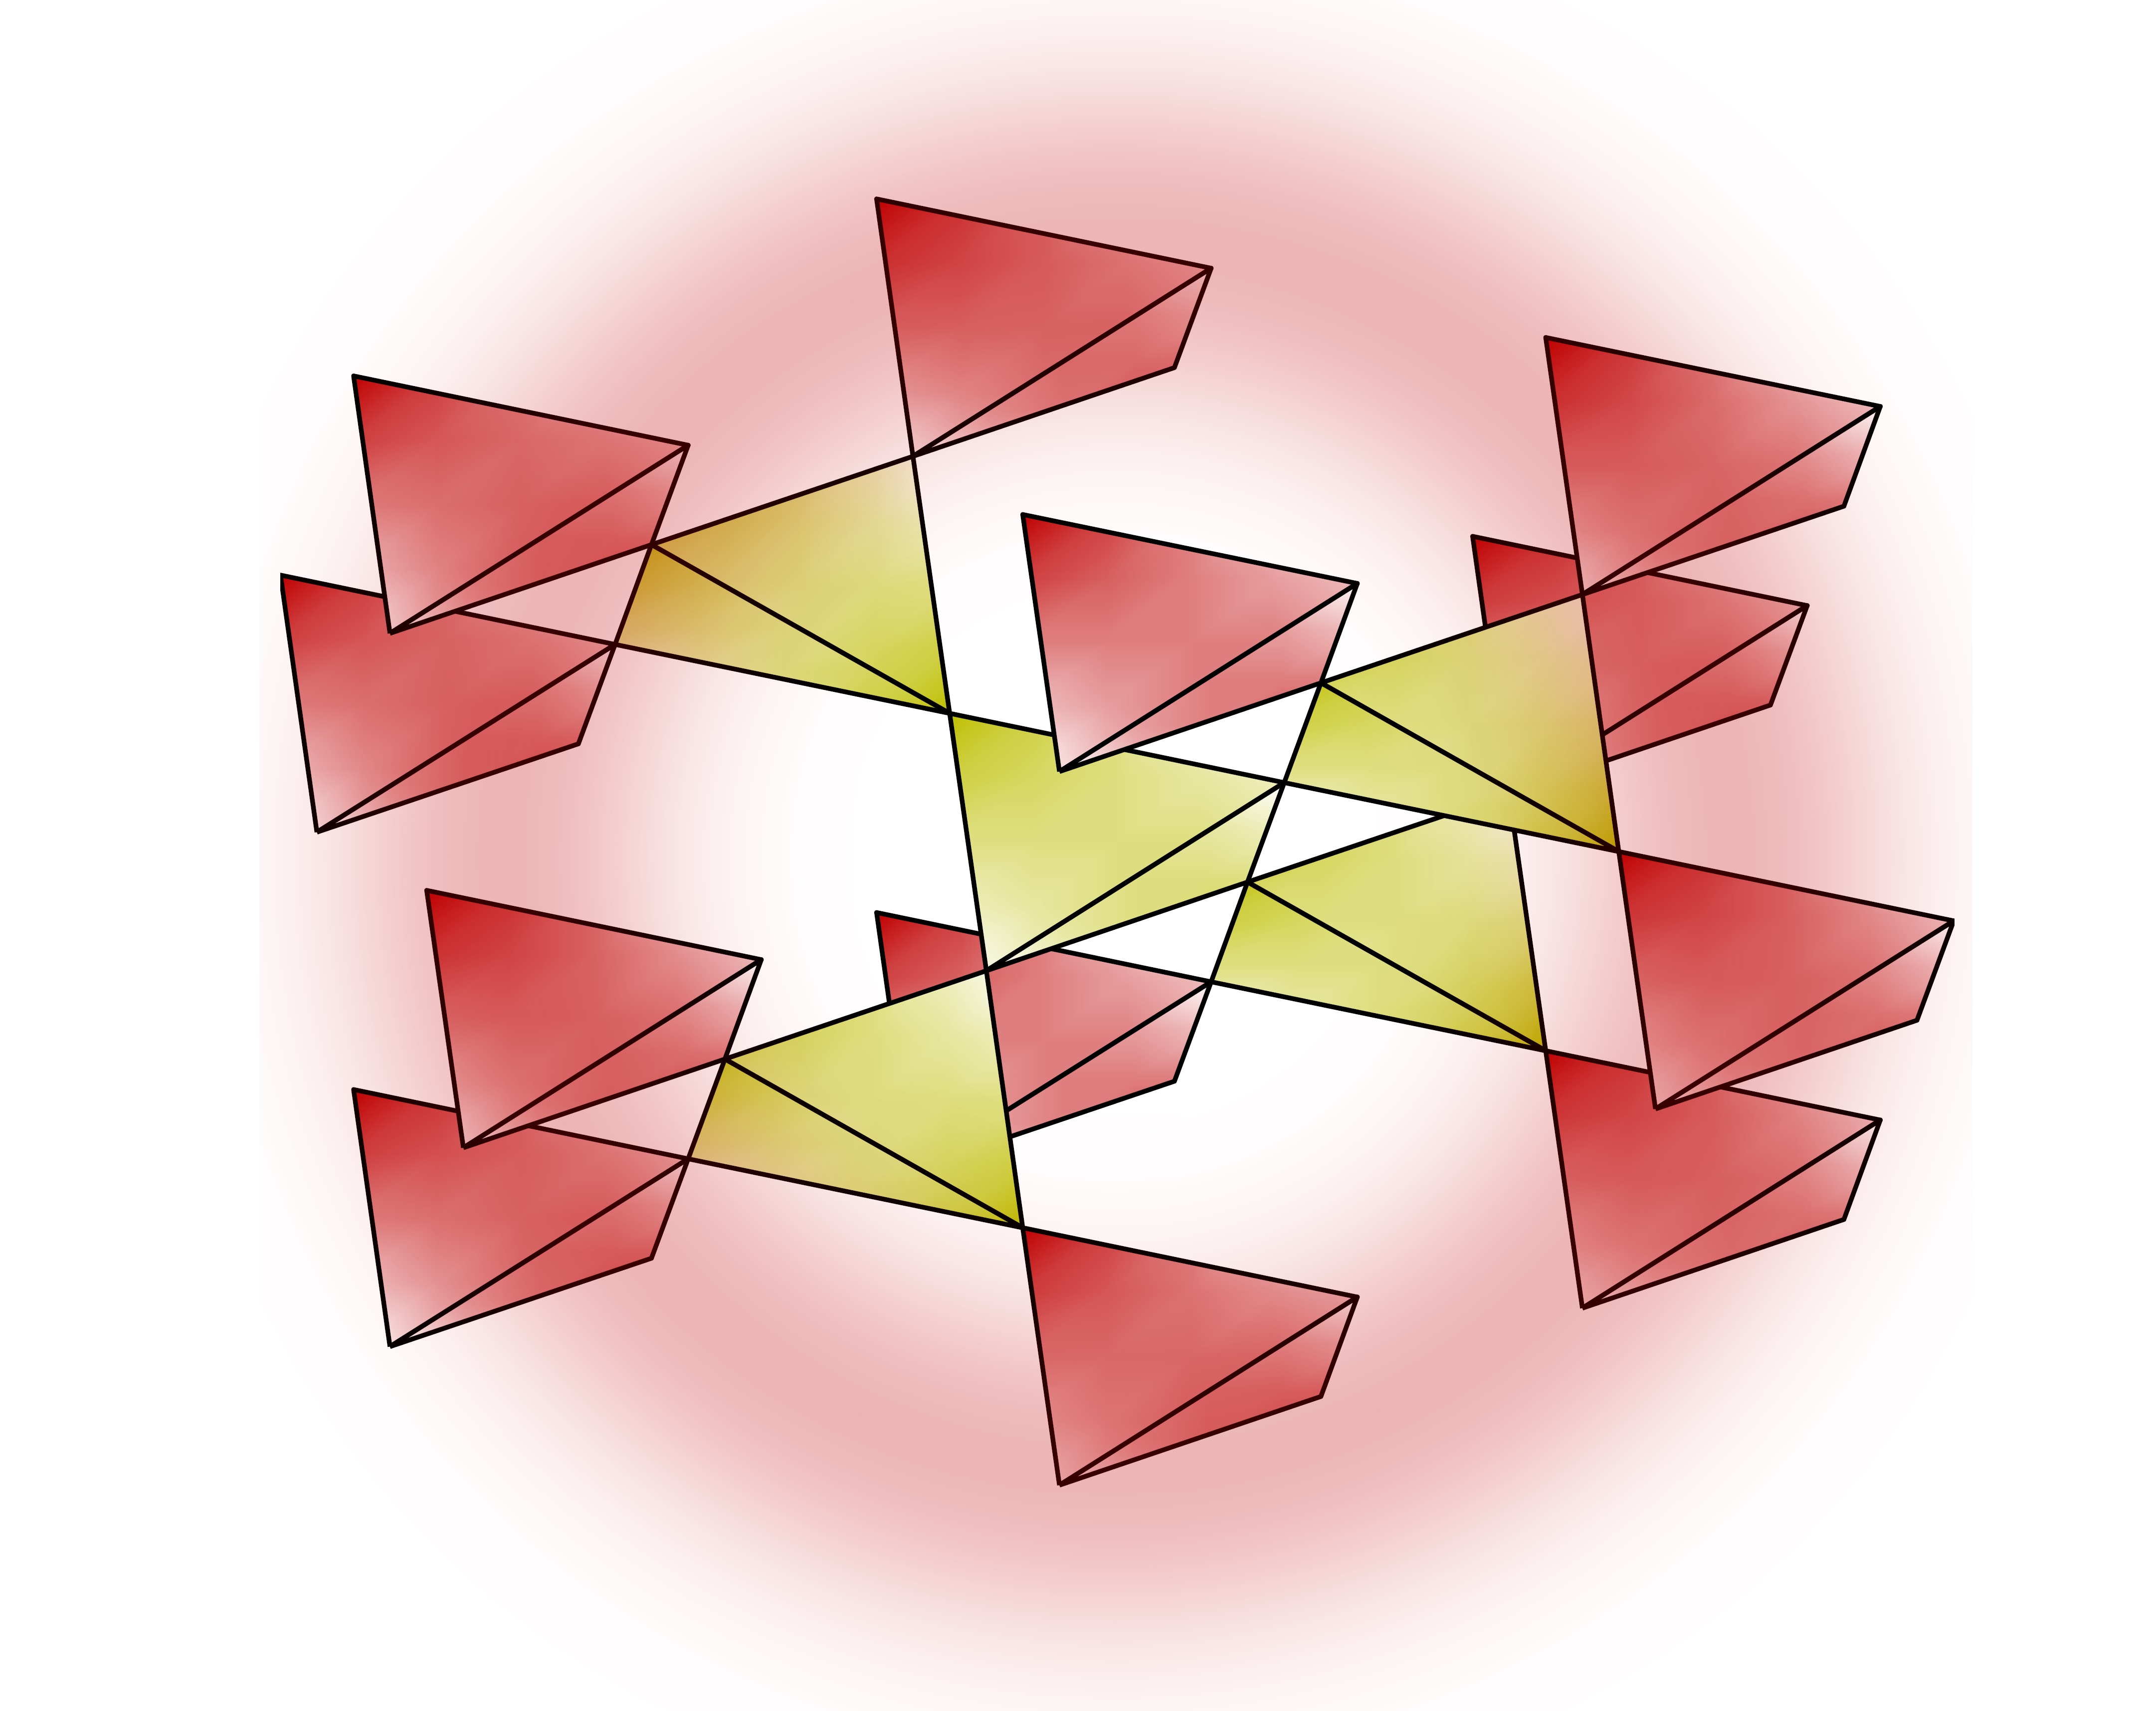 Nucleation of magnetism radiating from topologically non-trivial ordered tetrahedra (yellow) immersed in topologically trivial paramagnetic tetrahedra (red).